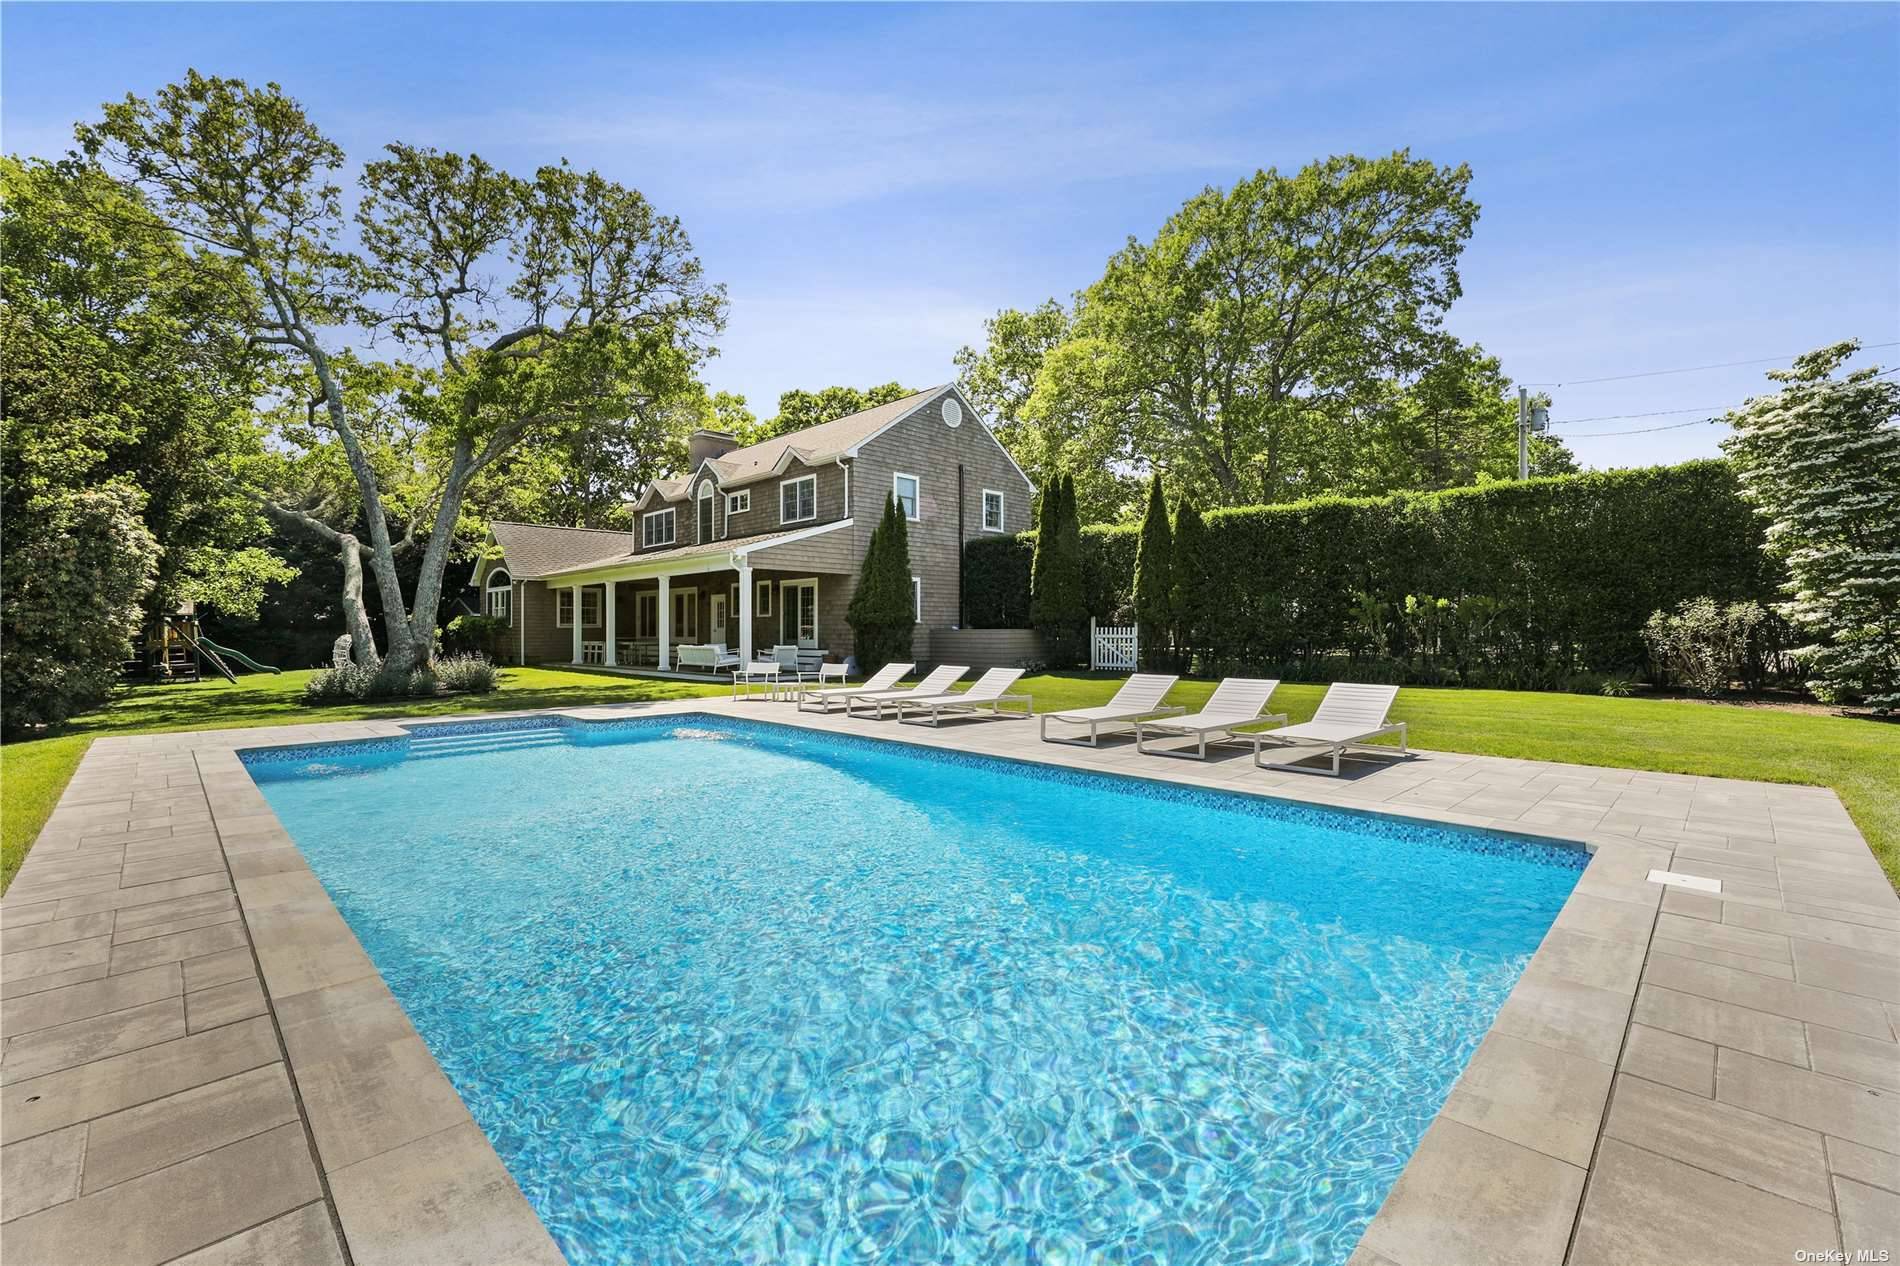 South of the highway, this postmodern gem offers an unparalleled Hamptons experience.